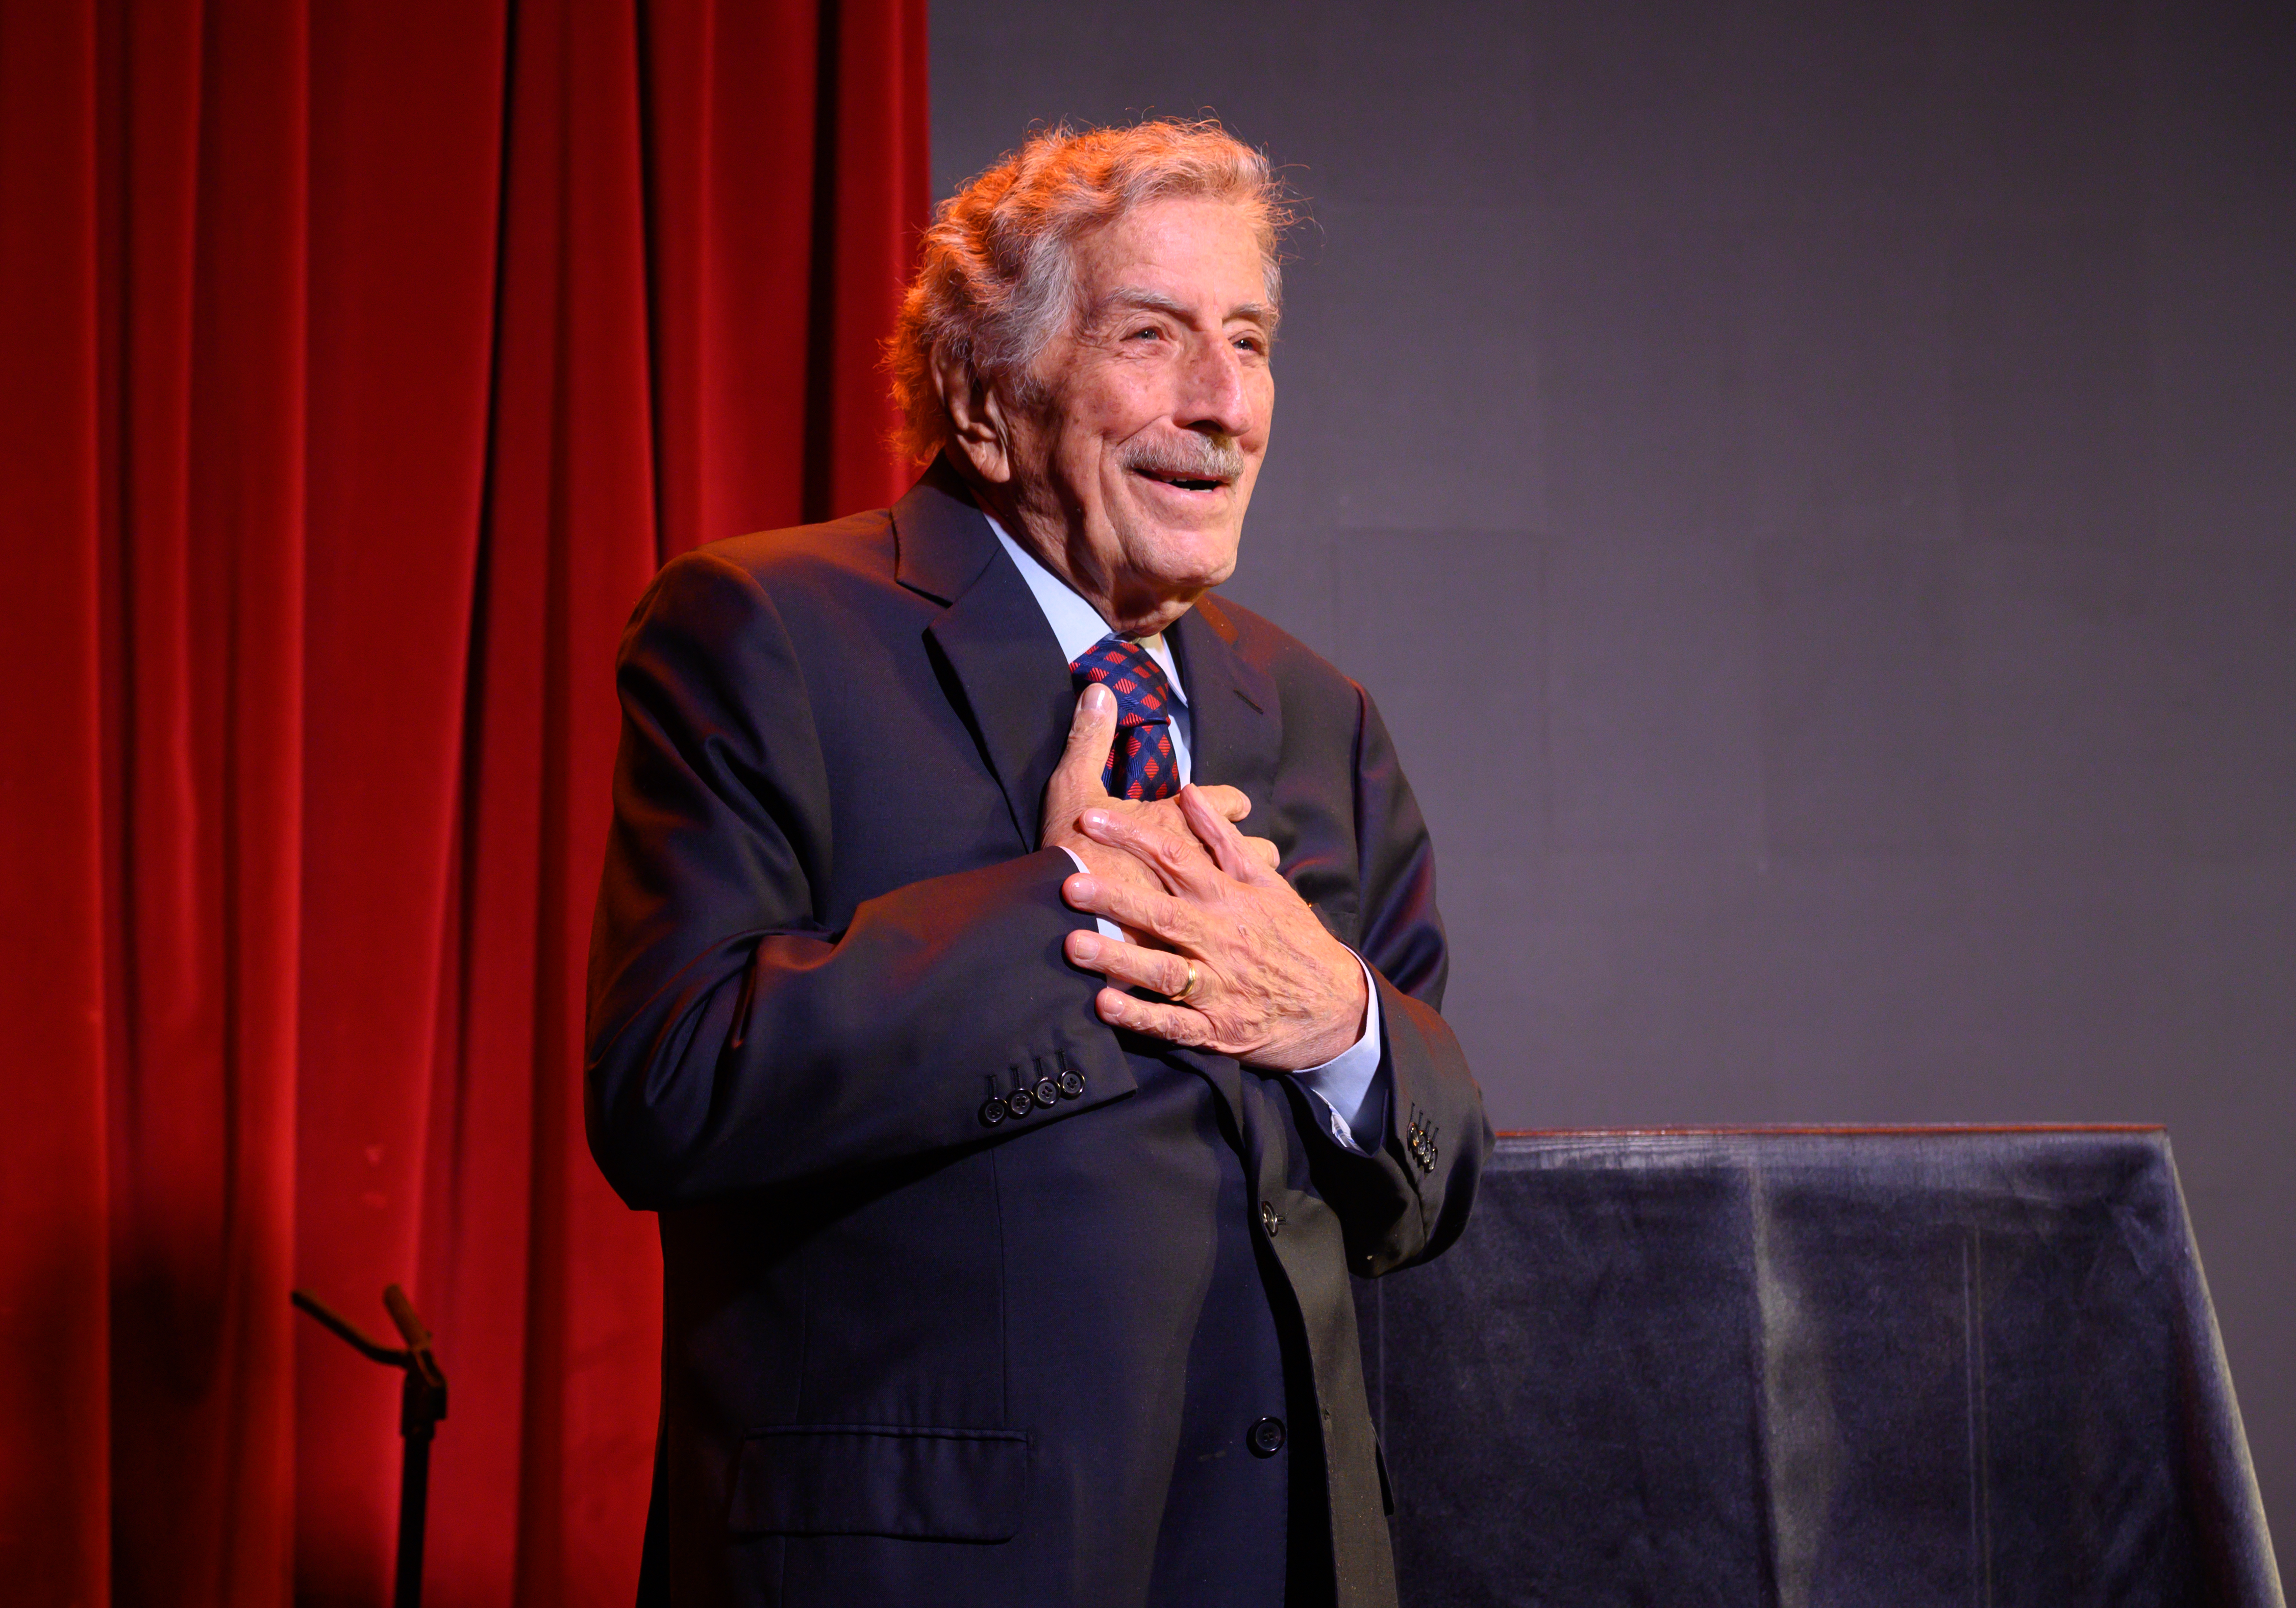 Tony Bennett bei der Art Students League's 2019 Gala im Edition Hotel am 4. November 2019 in New York City | Quelle: Getty Images